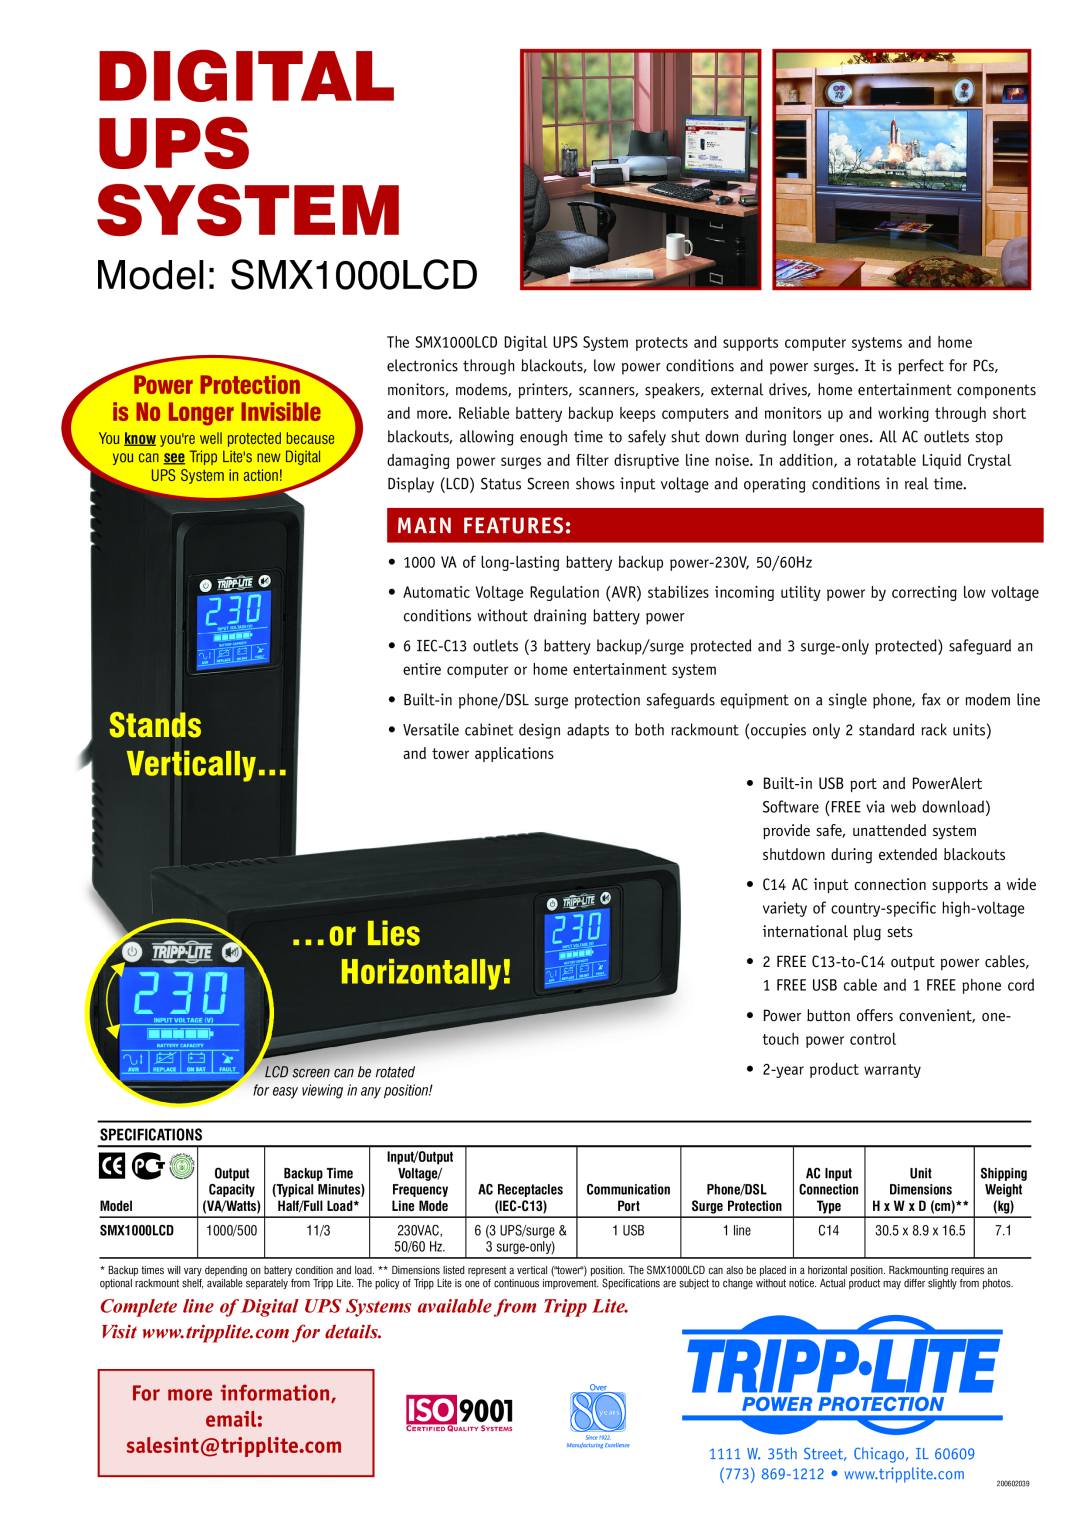 Tripp Lite SMX1000LCD owner manual Digital UPS System, Important Safety Instructions Quick Installation, Storage & Service 